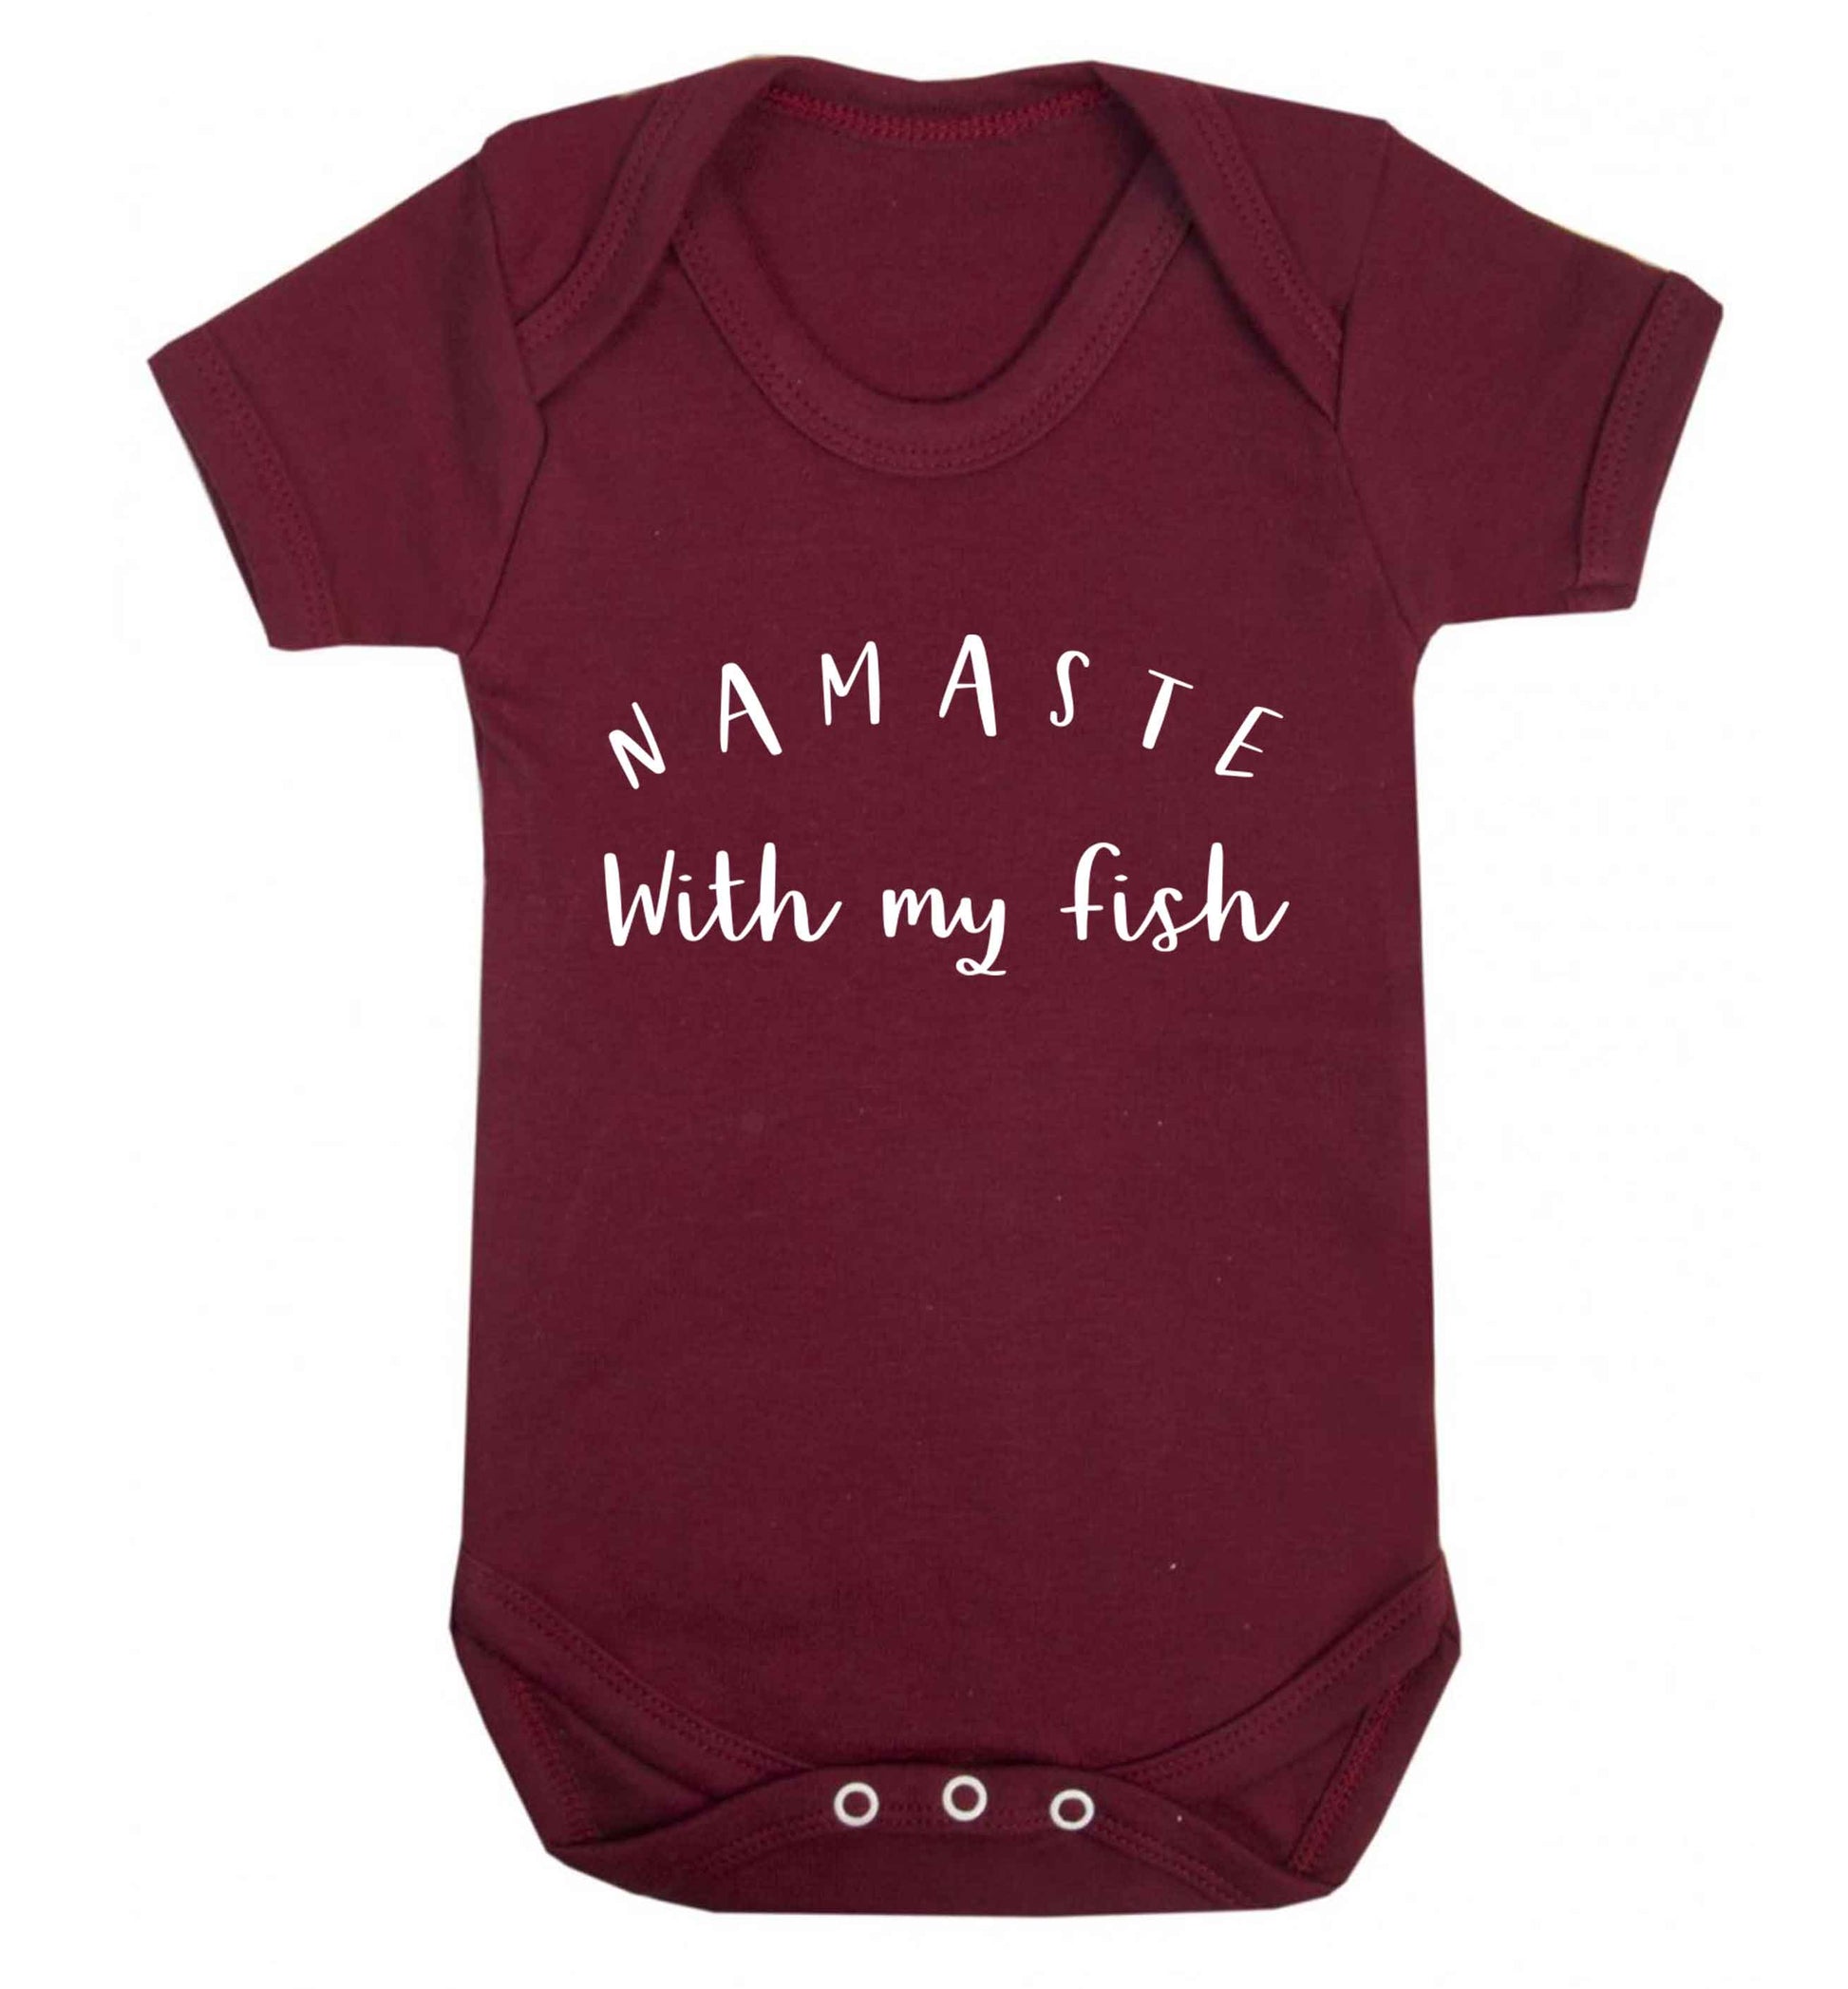 Namaste with my fish Baby Vest maroon 18-24 months